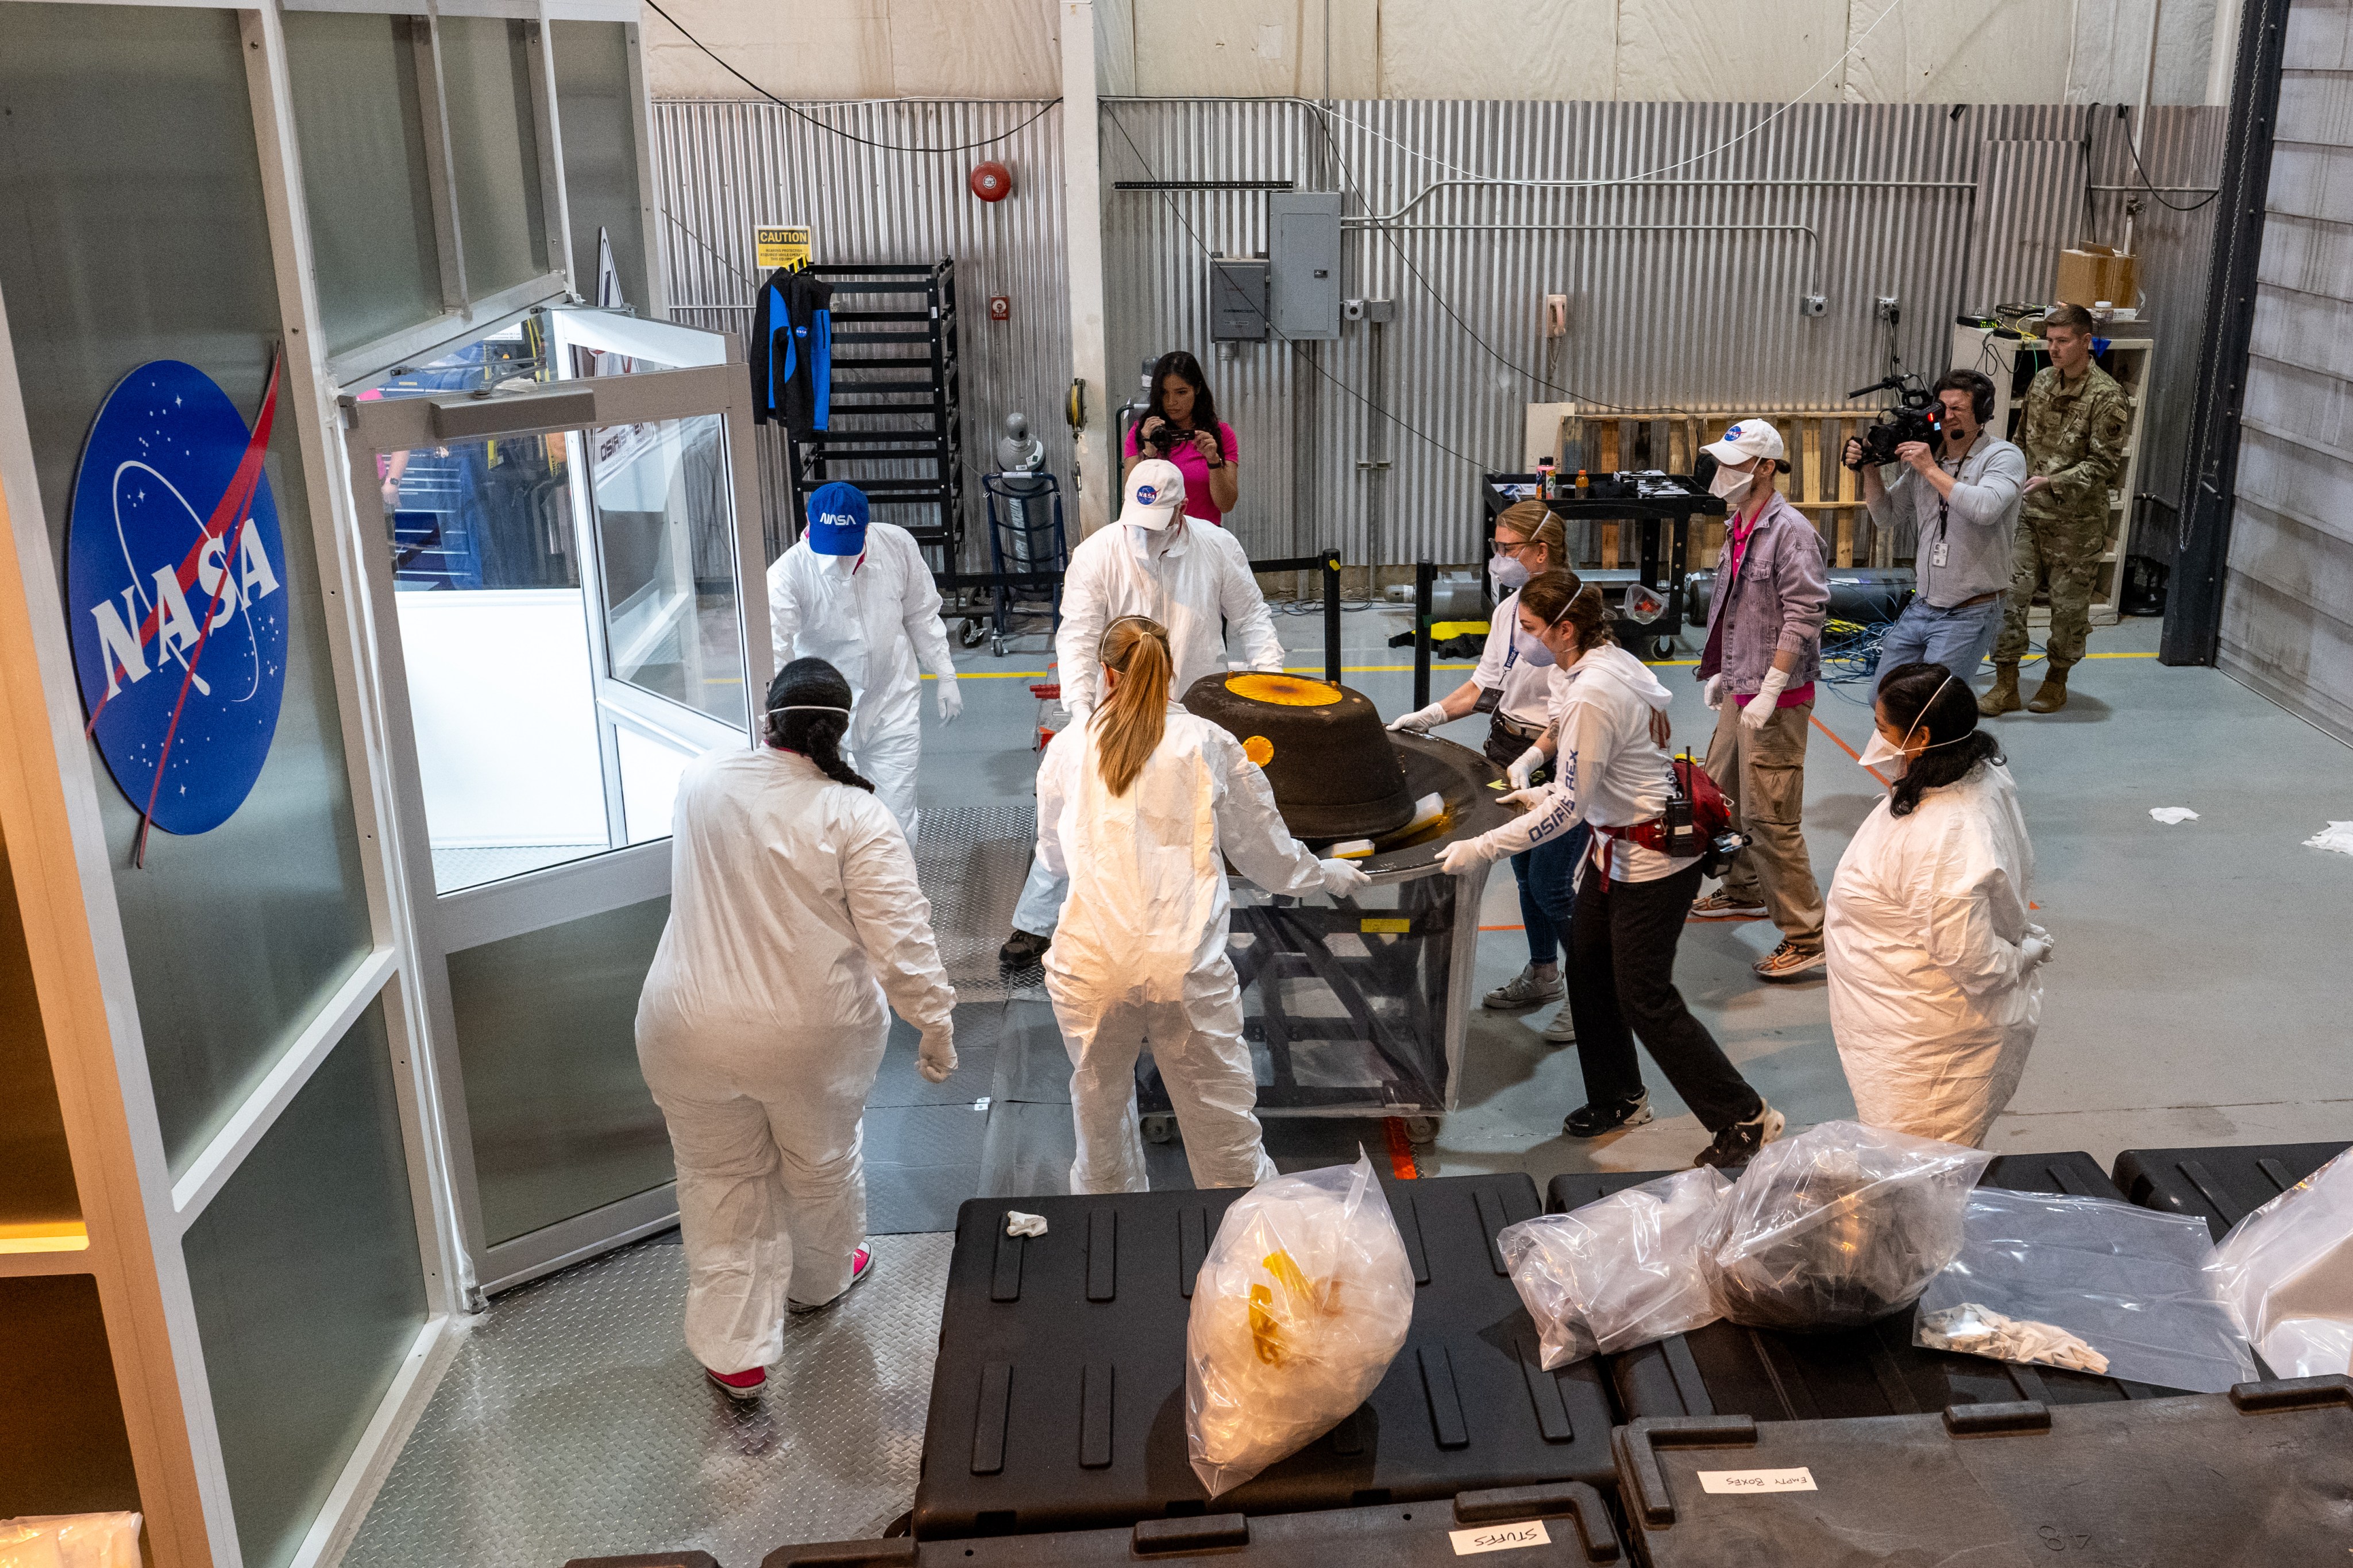 Several people transport the capsule into a temporary cleanroom on a cart